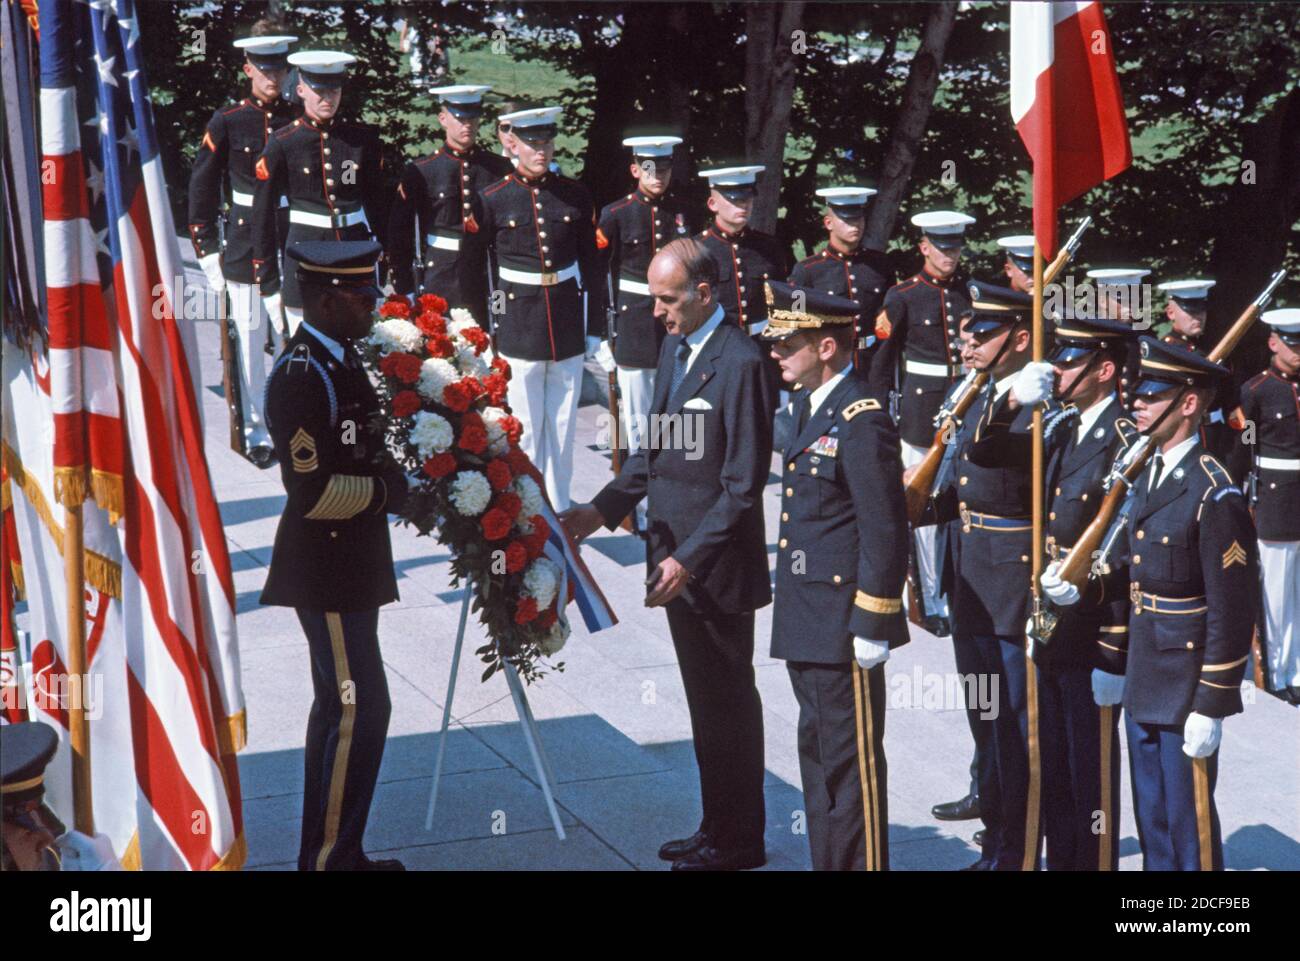 President Valéry Giscard d'Estaing of France, lays a wreath at the Tomb of the Unknown Soldier at Arlington National Cemetery in Arlington, Virginia on May 17, 1976.  Credit: Benjamin E. 'Gene' Forte / CNP /MediaPunch Stock Photo